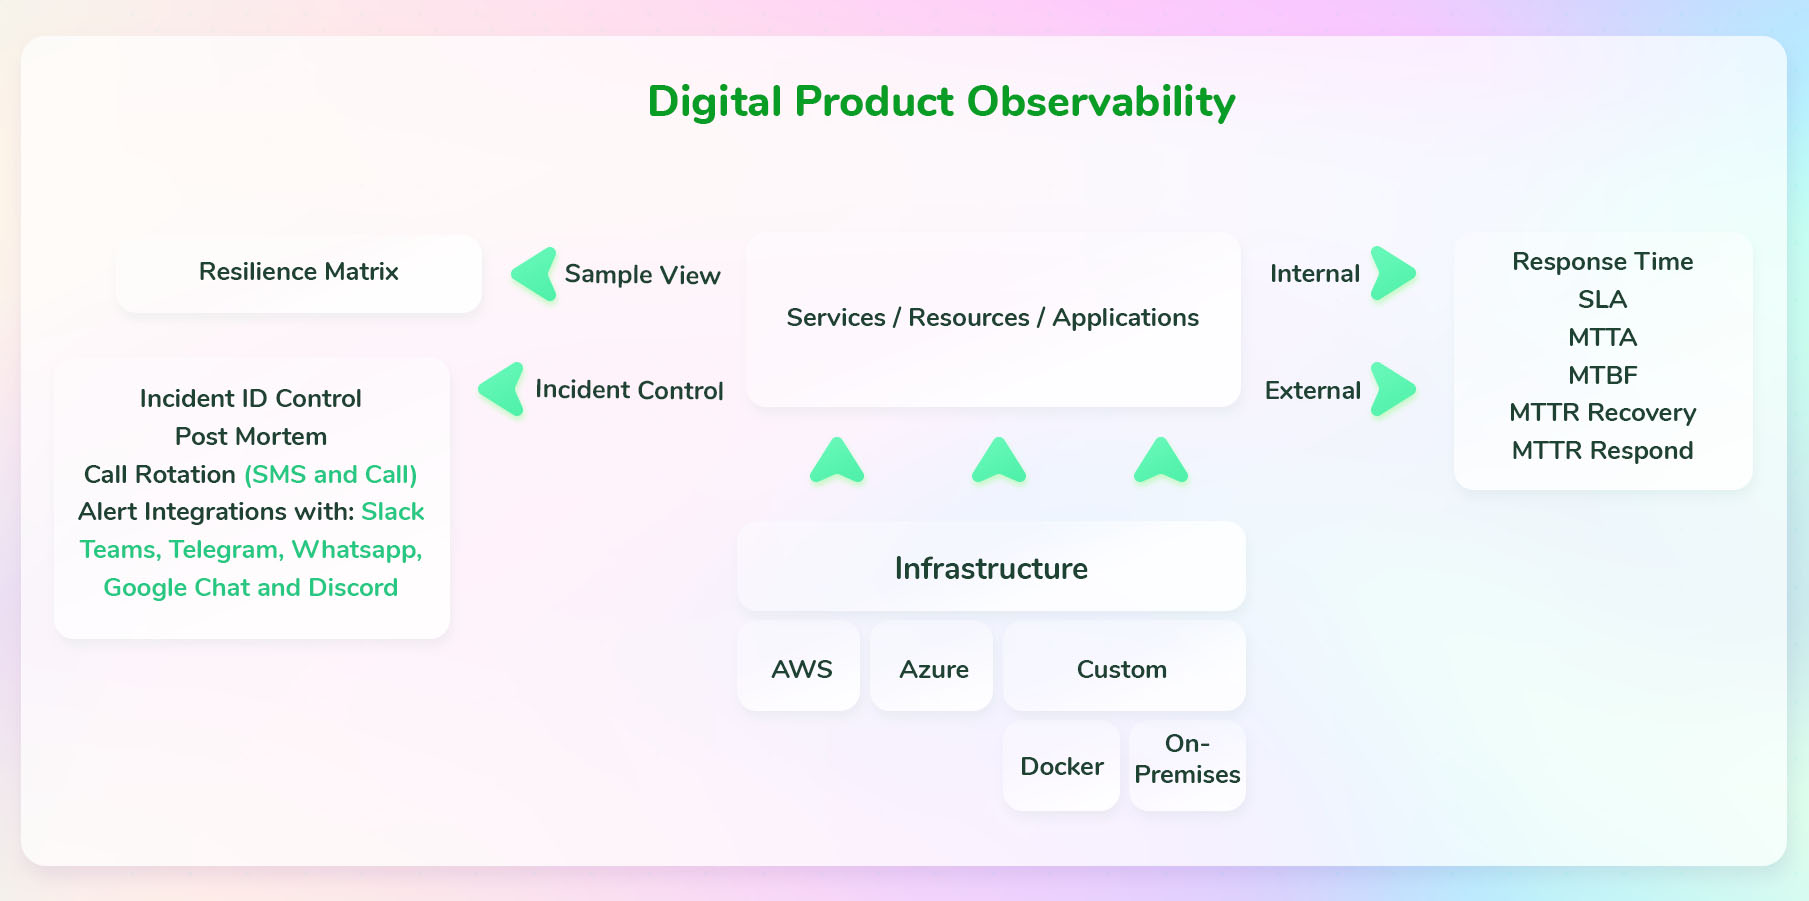 All-in-one Observability solution